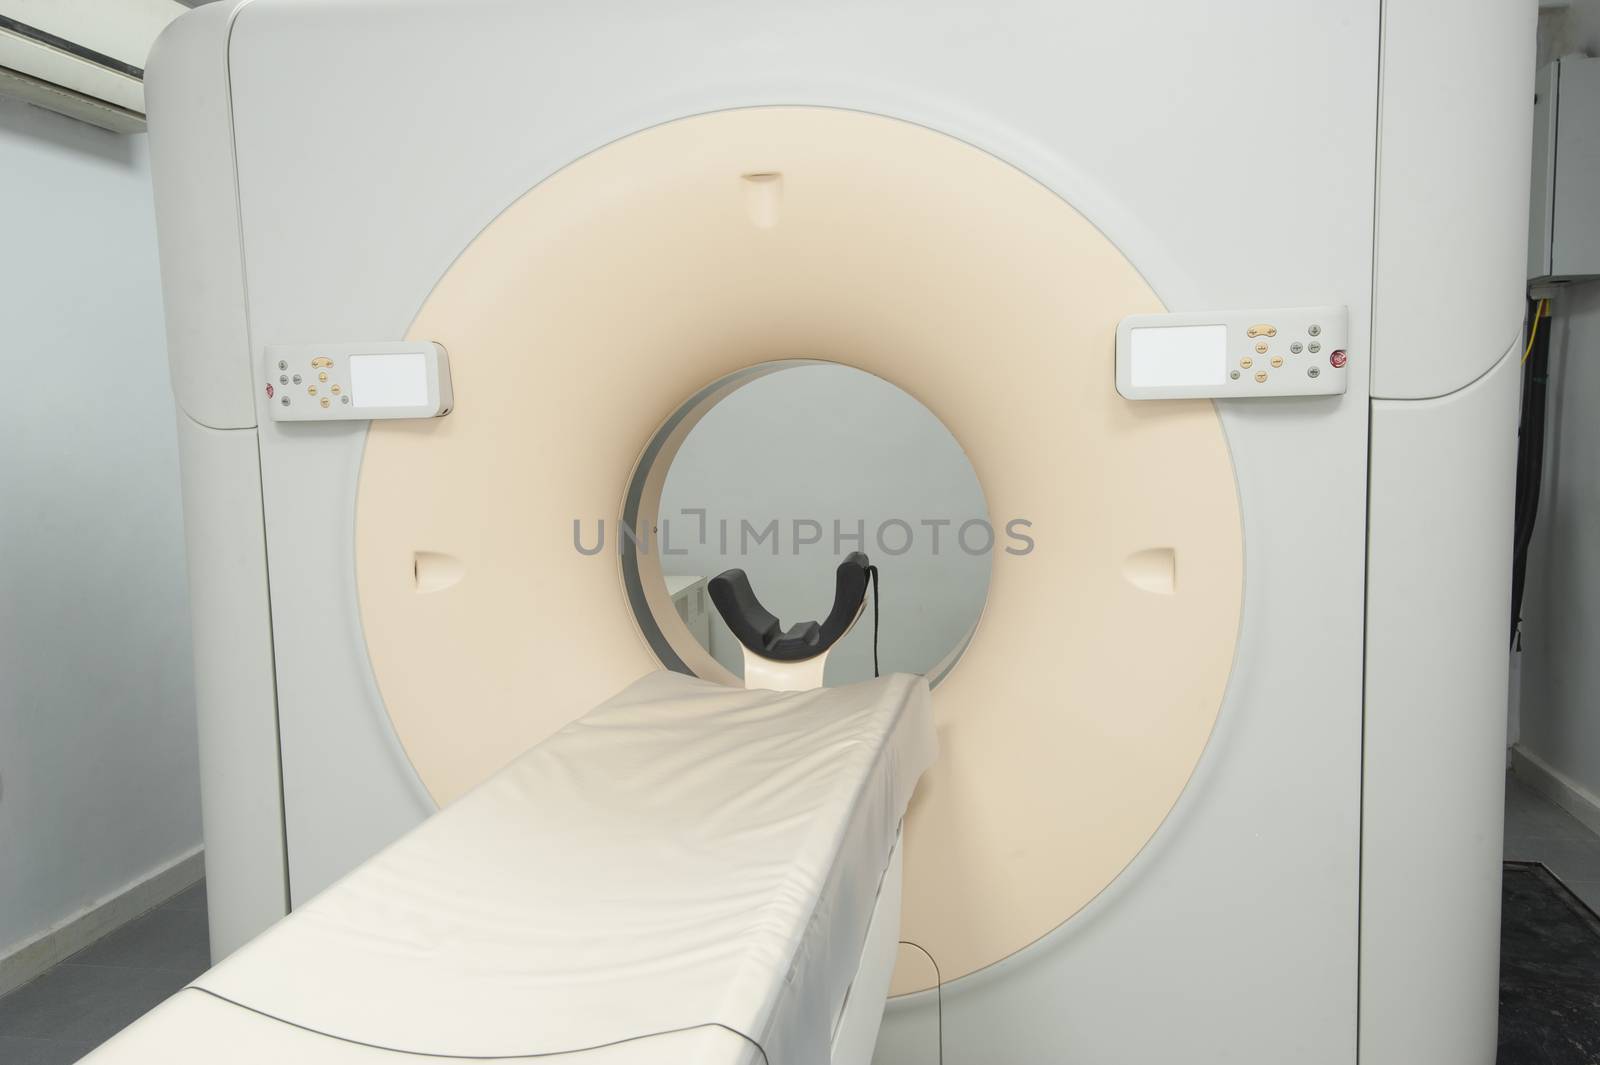 CT scanner in a hospital medical clinic by paulvinten